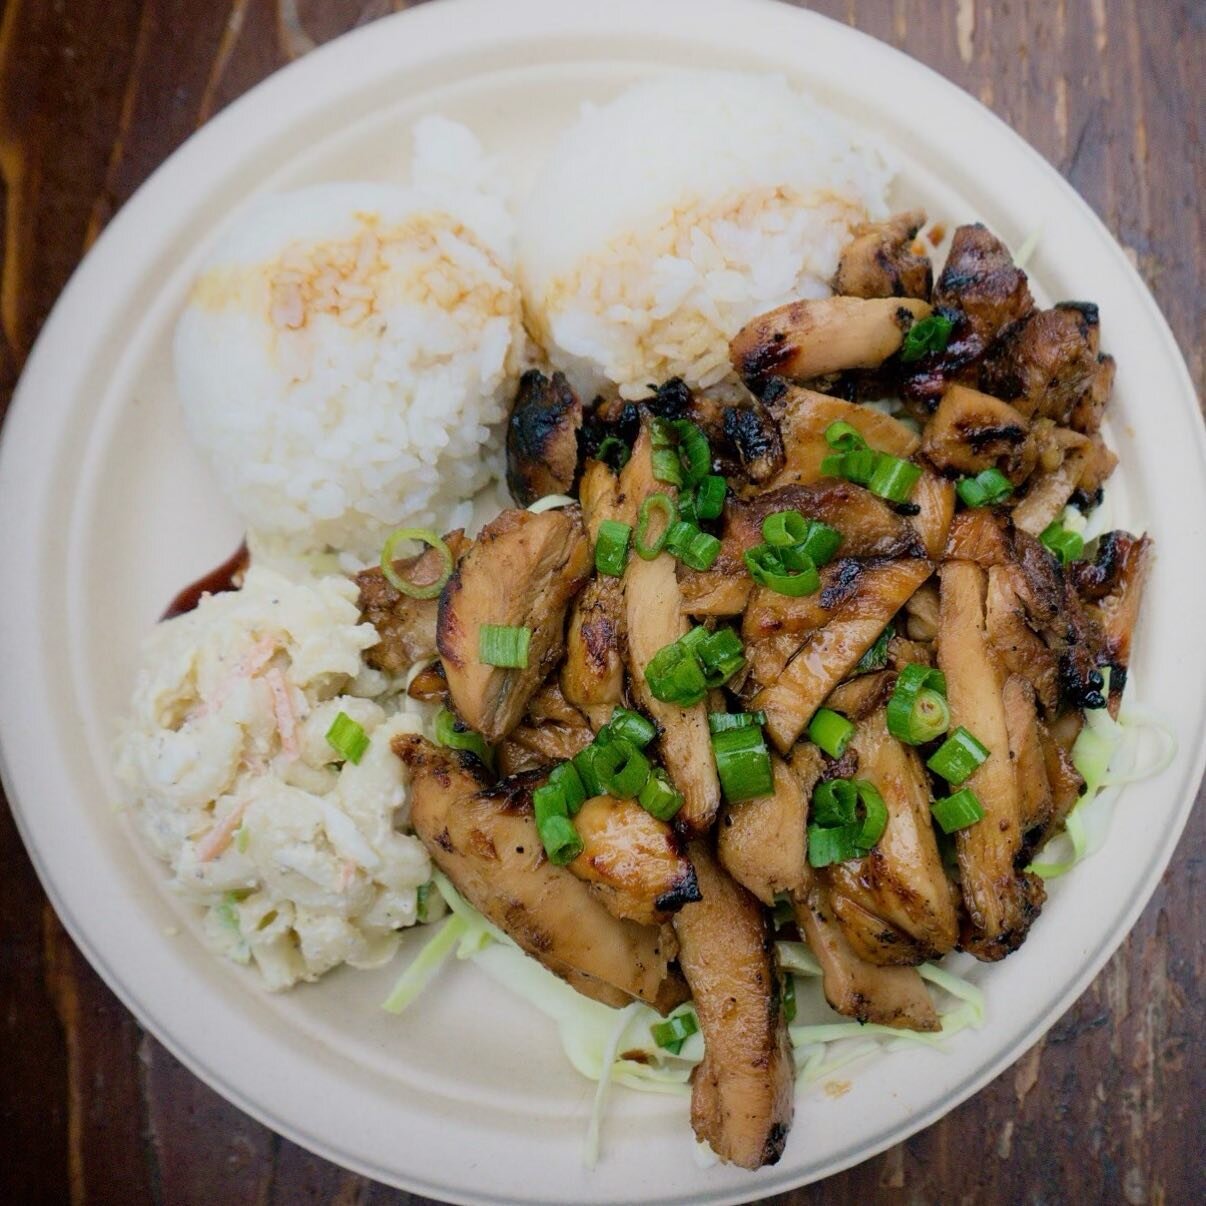 Happy Aloha Friday!🌺
Teriyaki Lunch Plate 
$11 special today

Come visit us at:
5109 Cass Street 
San Diego, California 92109

Contact Us:
(858) 361-1280

Hours of operation:
M-F: 7am-2pm
Sat/Sun: 7am-3pm
𓆉❀☼
 #pacificbeach #leilaniscafe #coffee #h